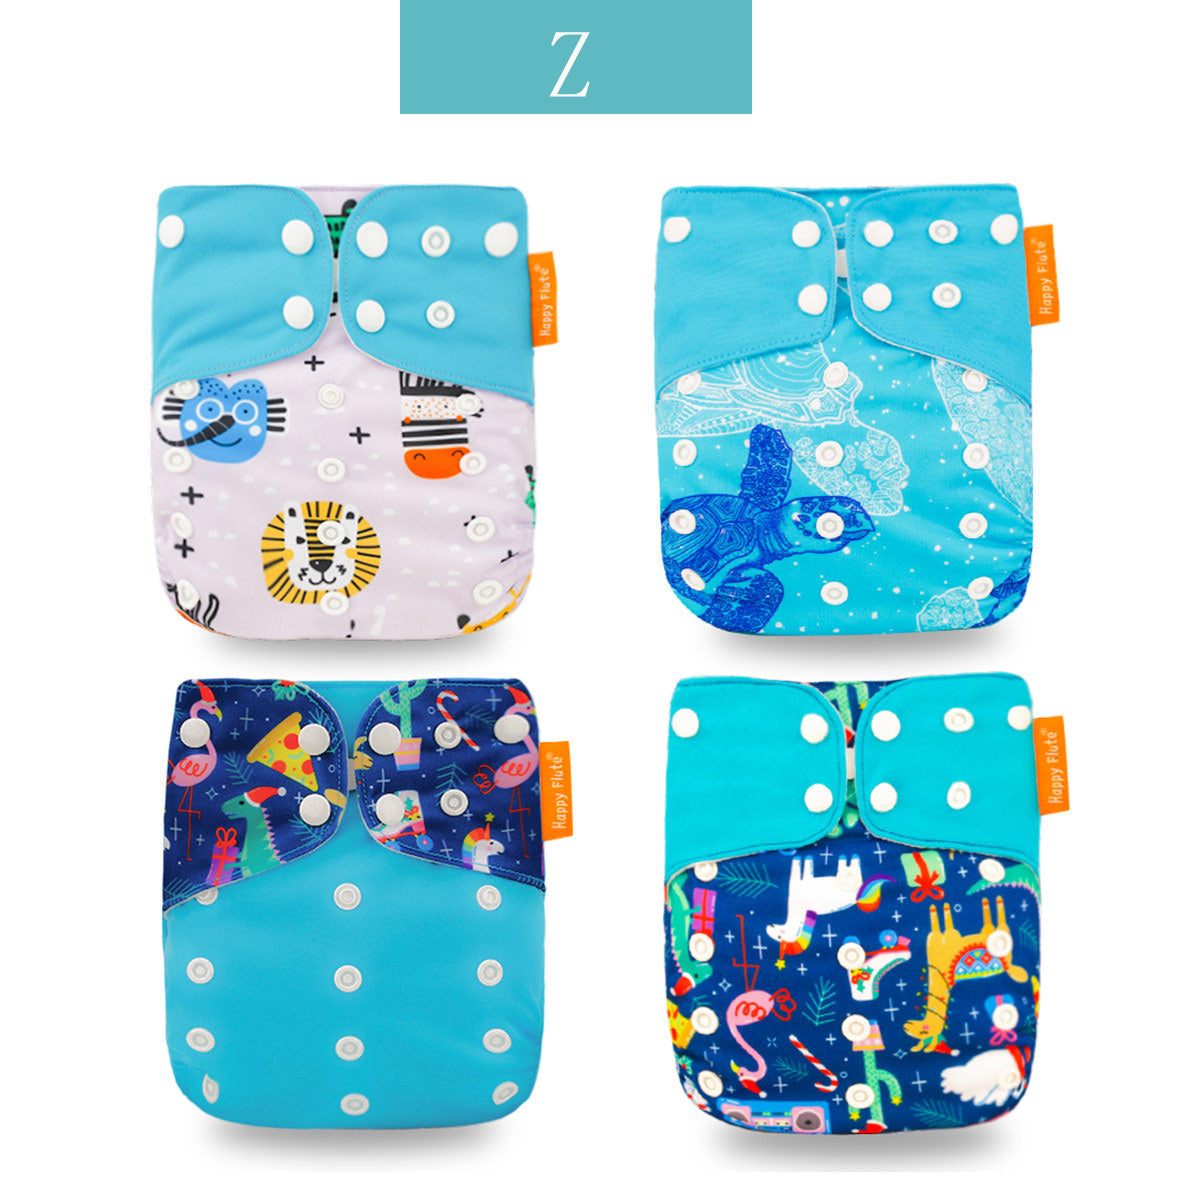 Baby Training Pants Washable Cloth Diapers